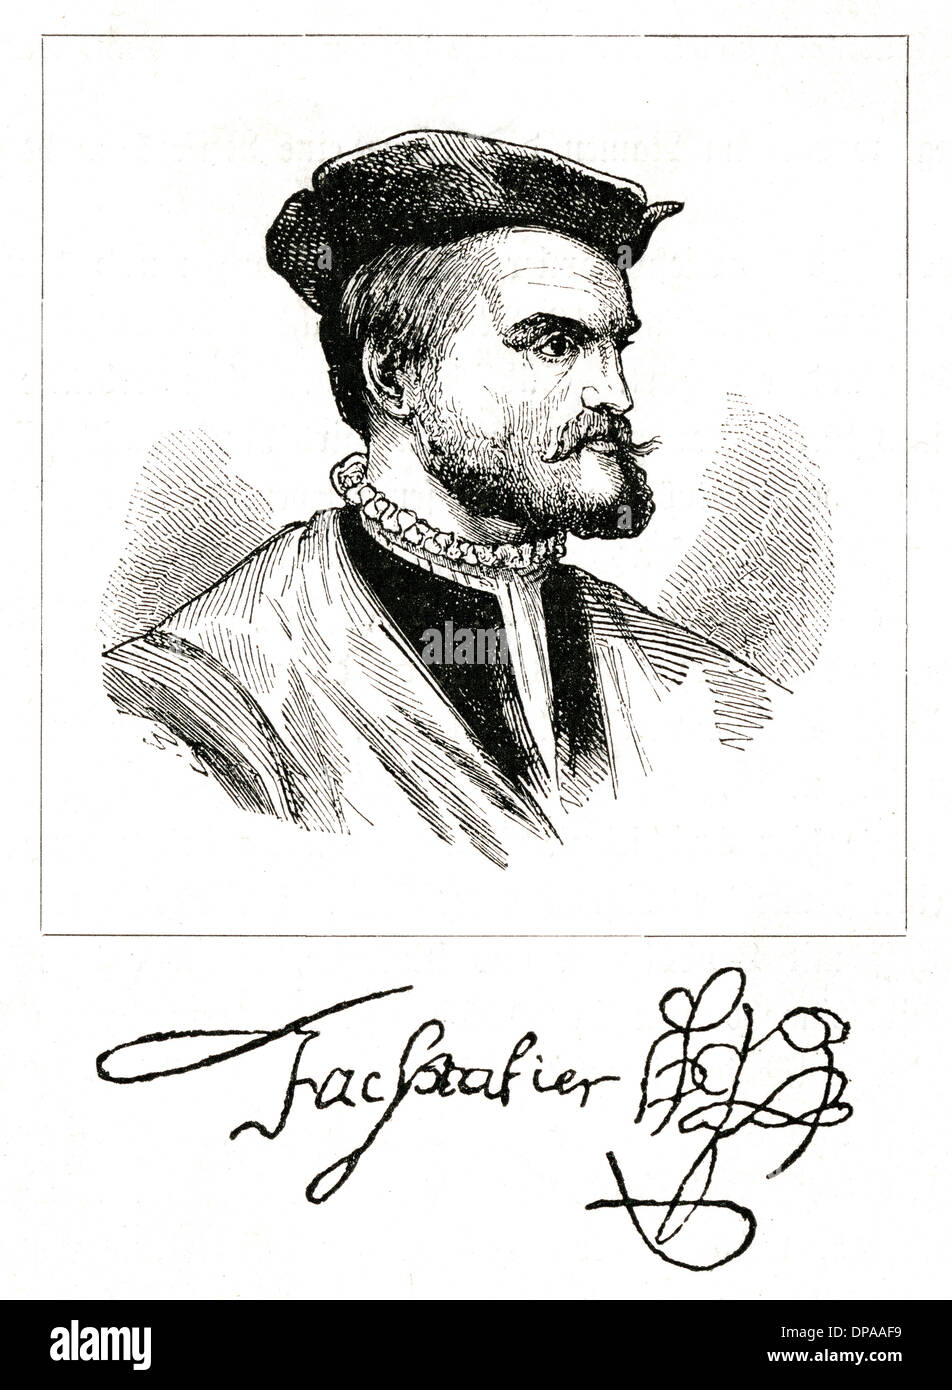 picture of jacques cartier